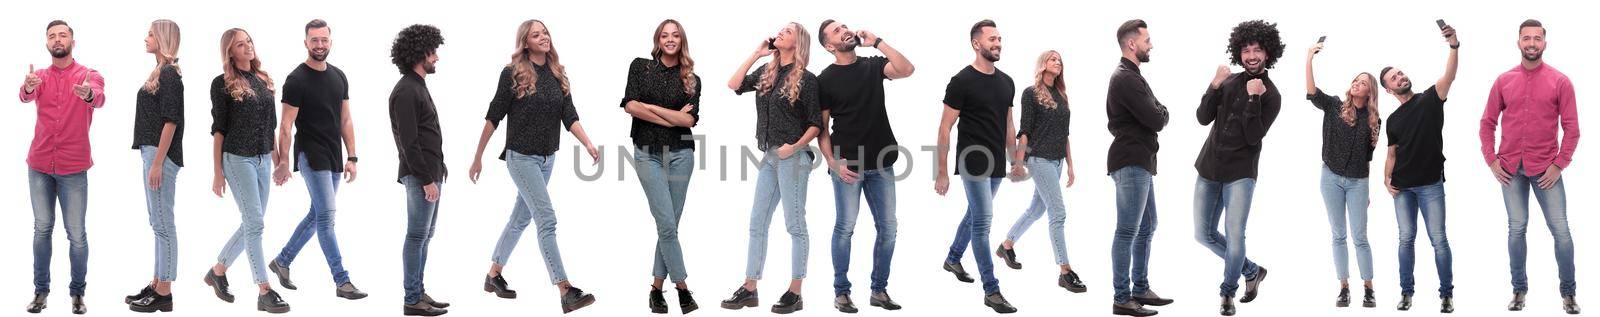 collage of photos of modern casual young people. isolated on a white background